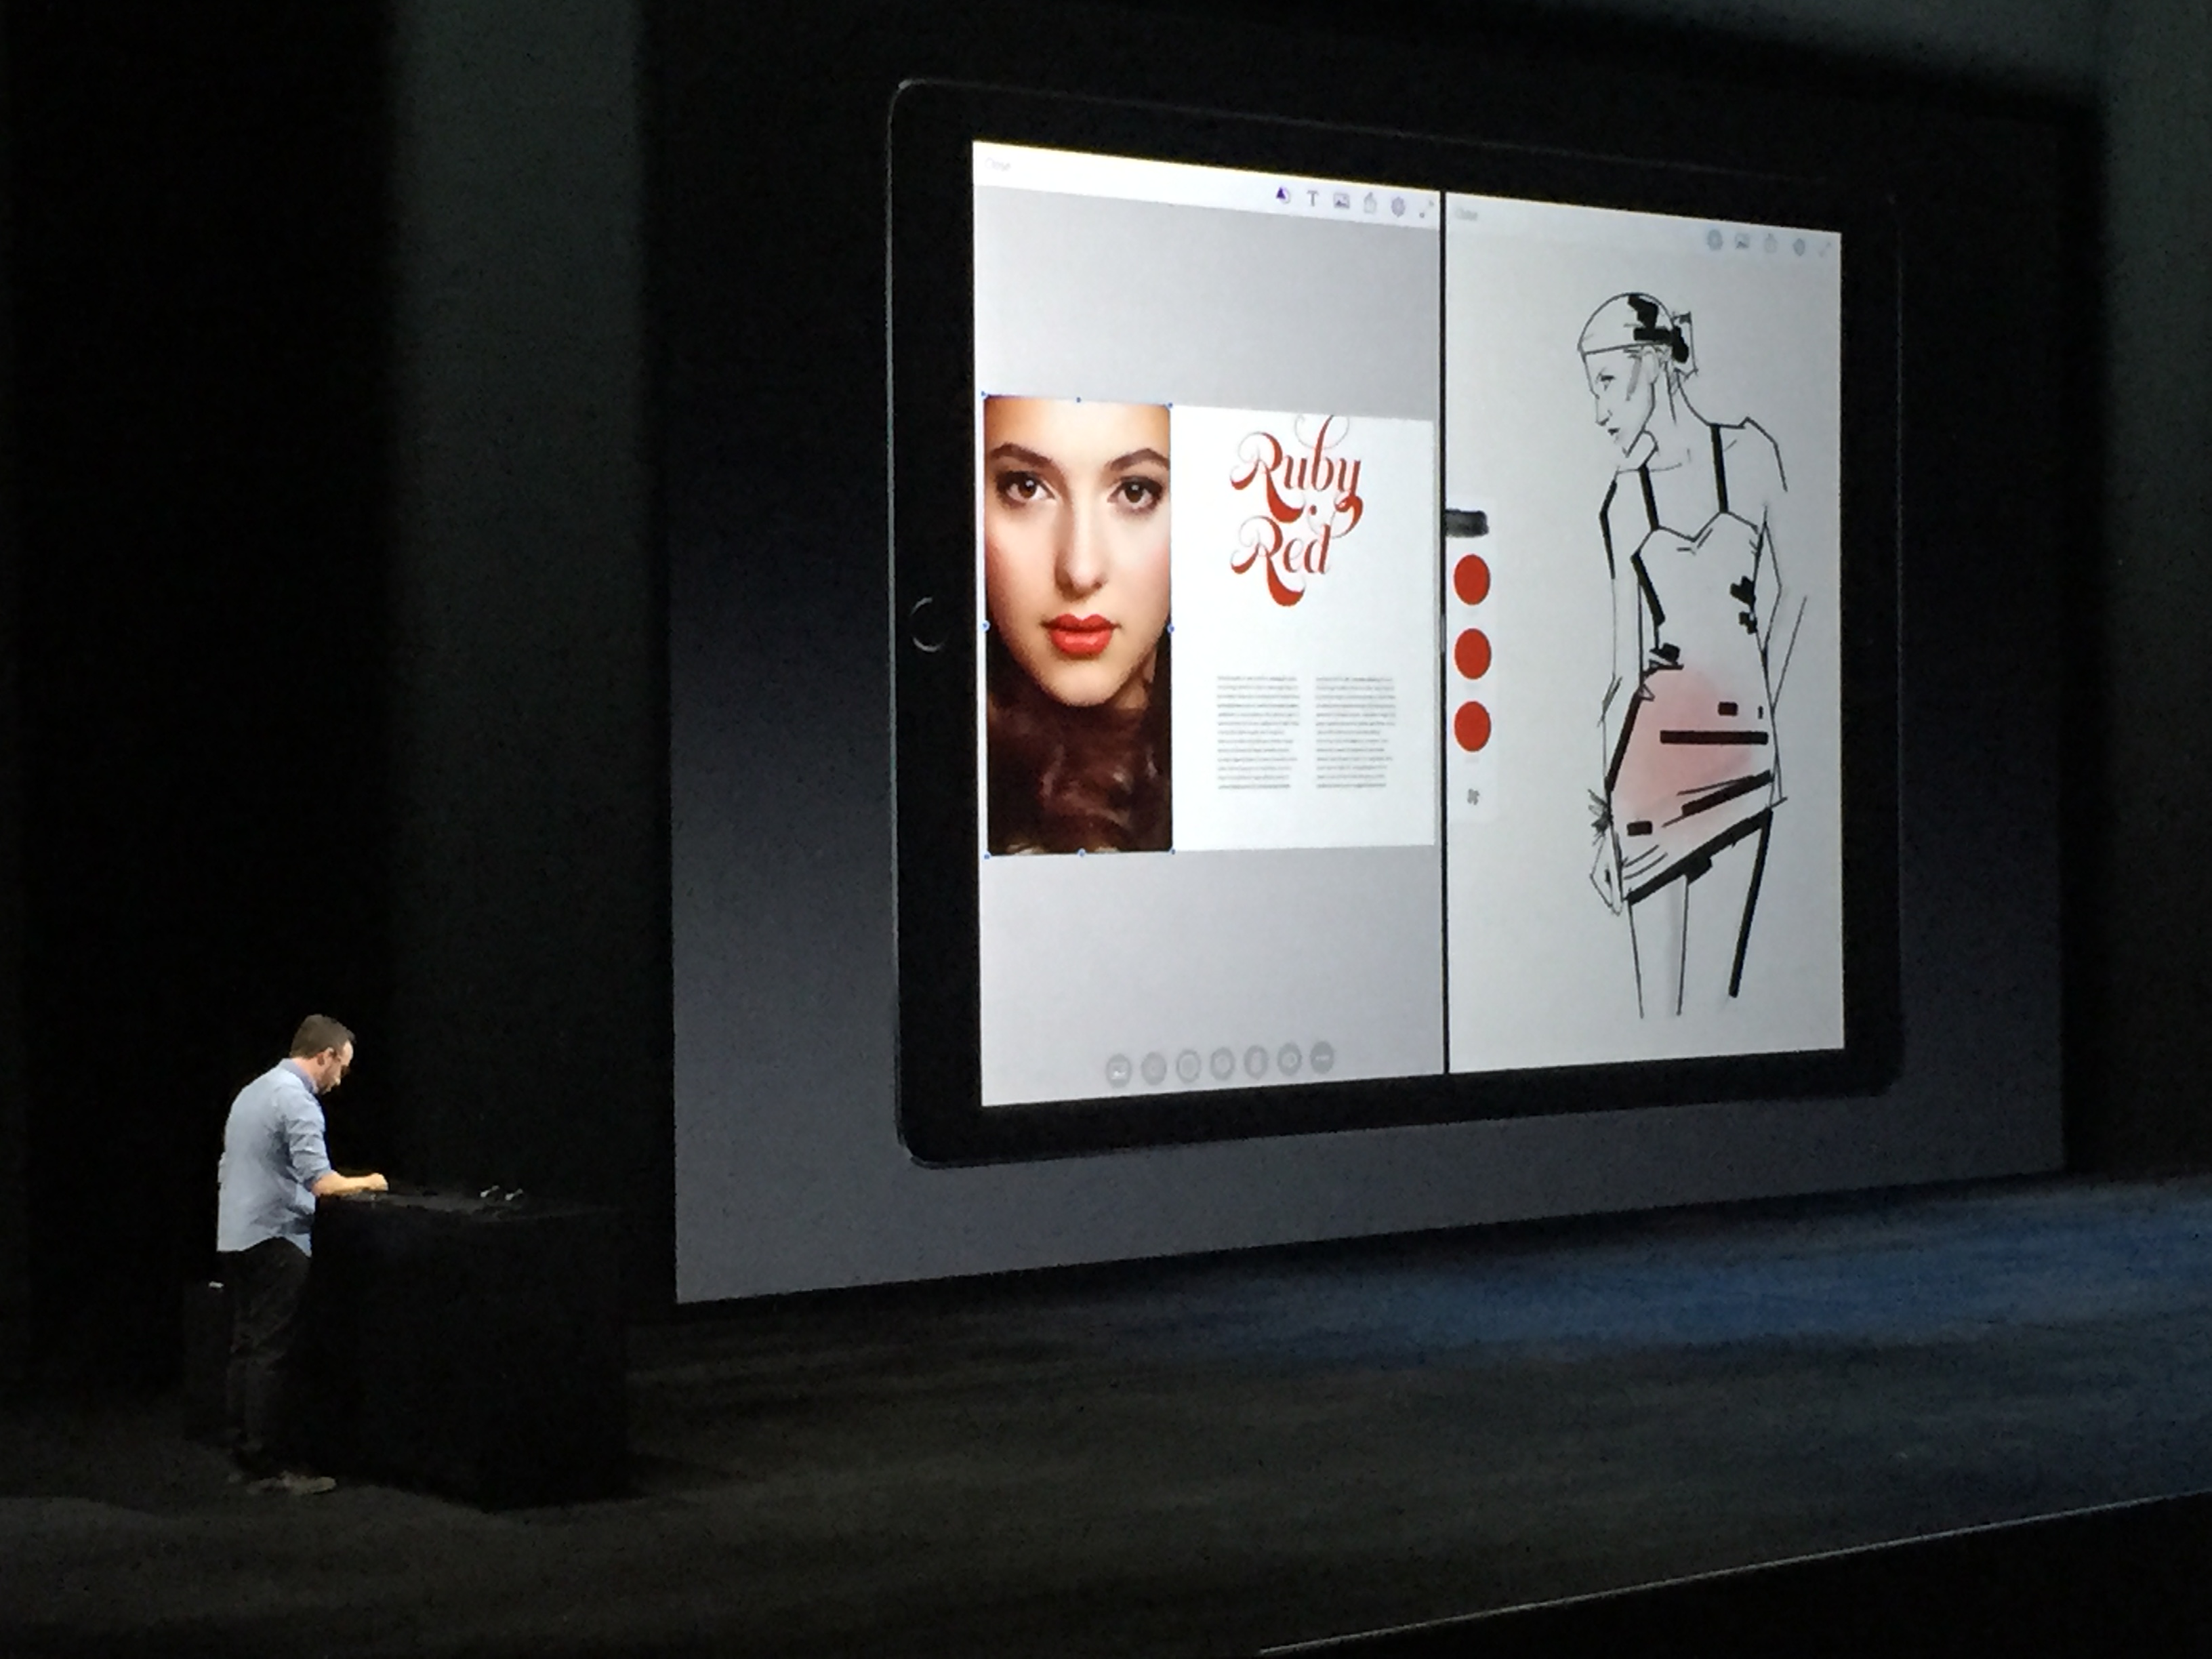 Eric Snowden, Director of Mobile Design, Adobe, showcasing Photoshop Fix at during Apple iPad Pro Keynote (image courtesy: https://blogs.adobe.com)